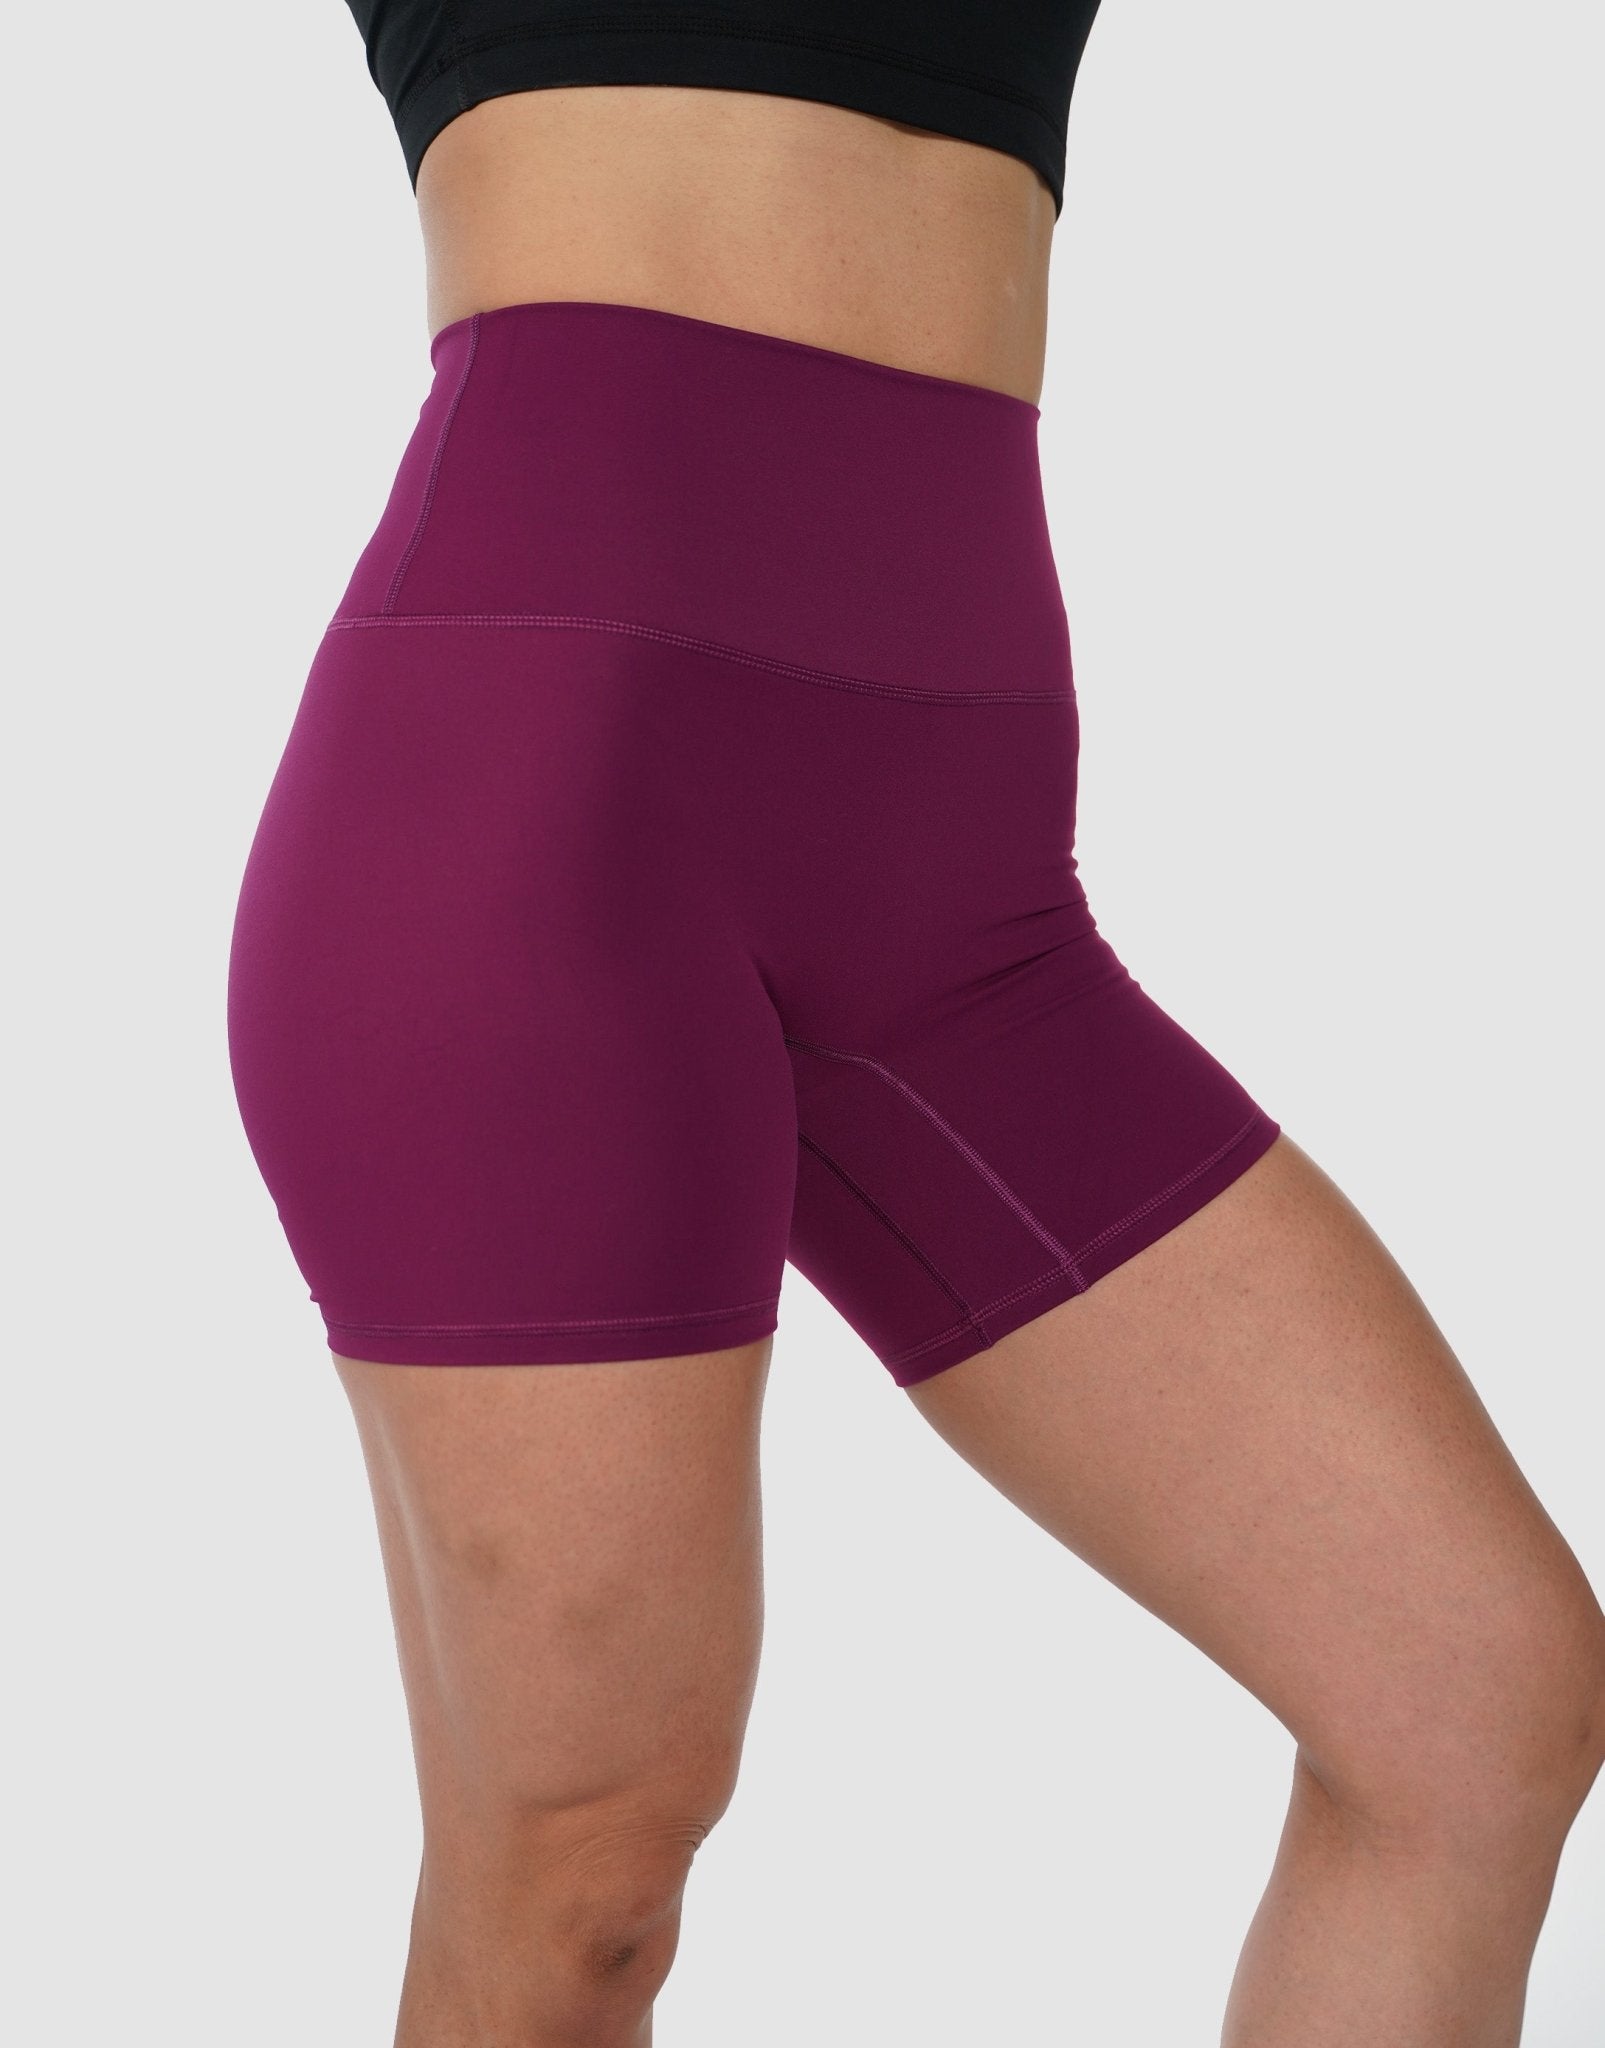 Vinconie Cycling Shorts for Women Anti Chafing Underwear Cropped